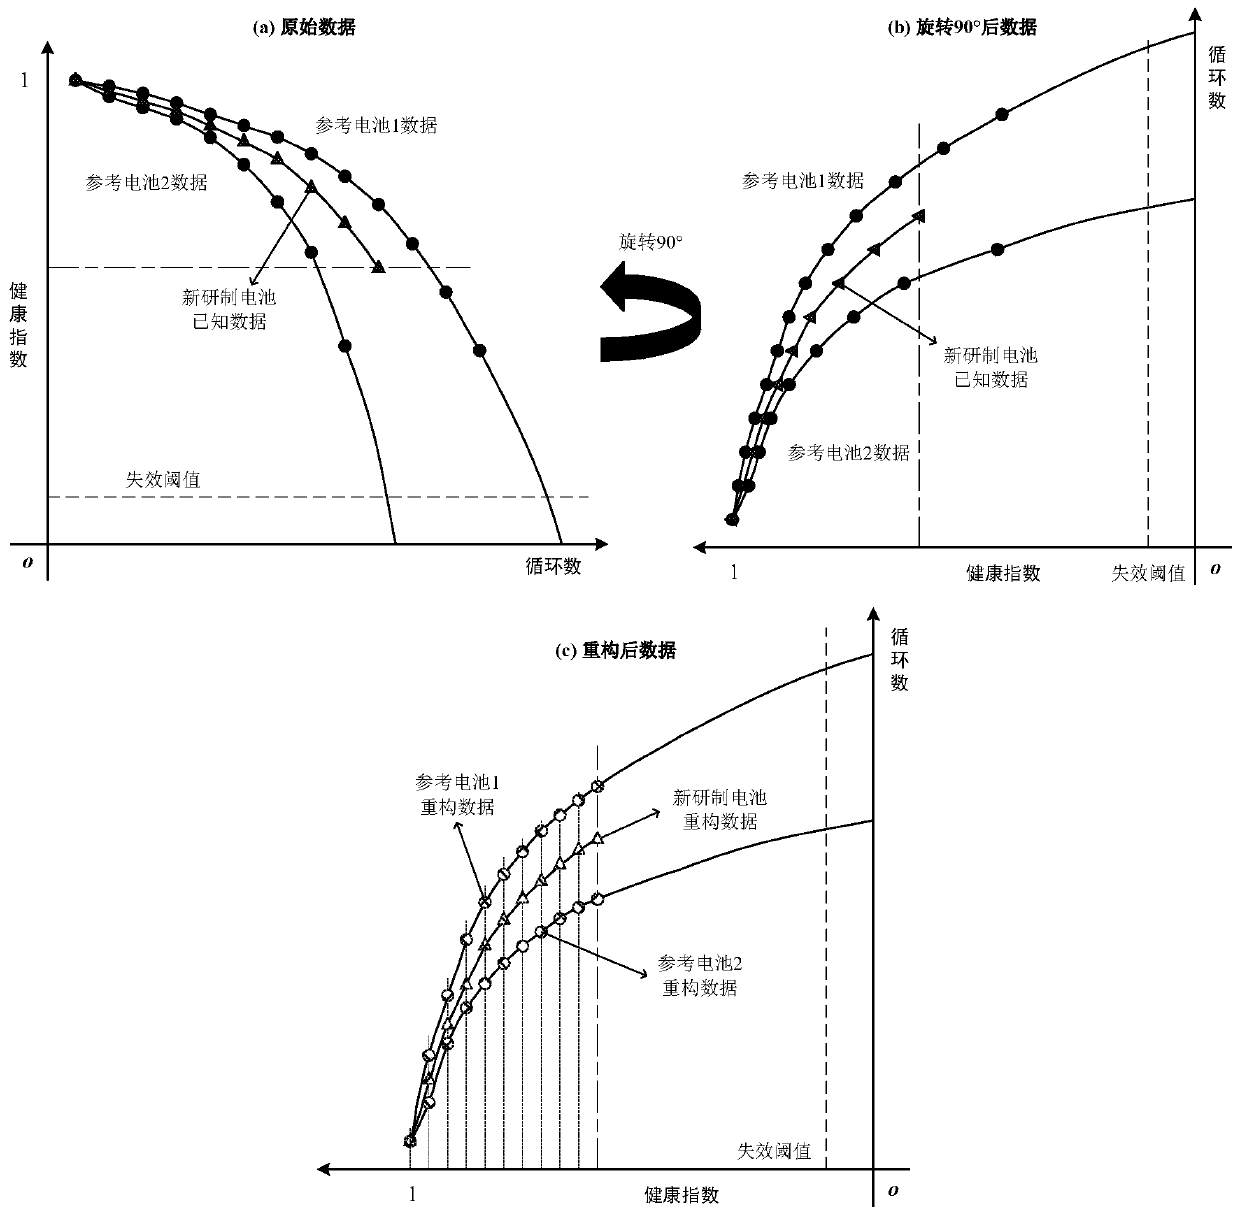 A Lithium Battery Life Prediction Method Based on Degradation Trajectory Coordinate Reconstruction and Multiple Linear Regression